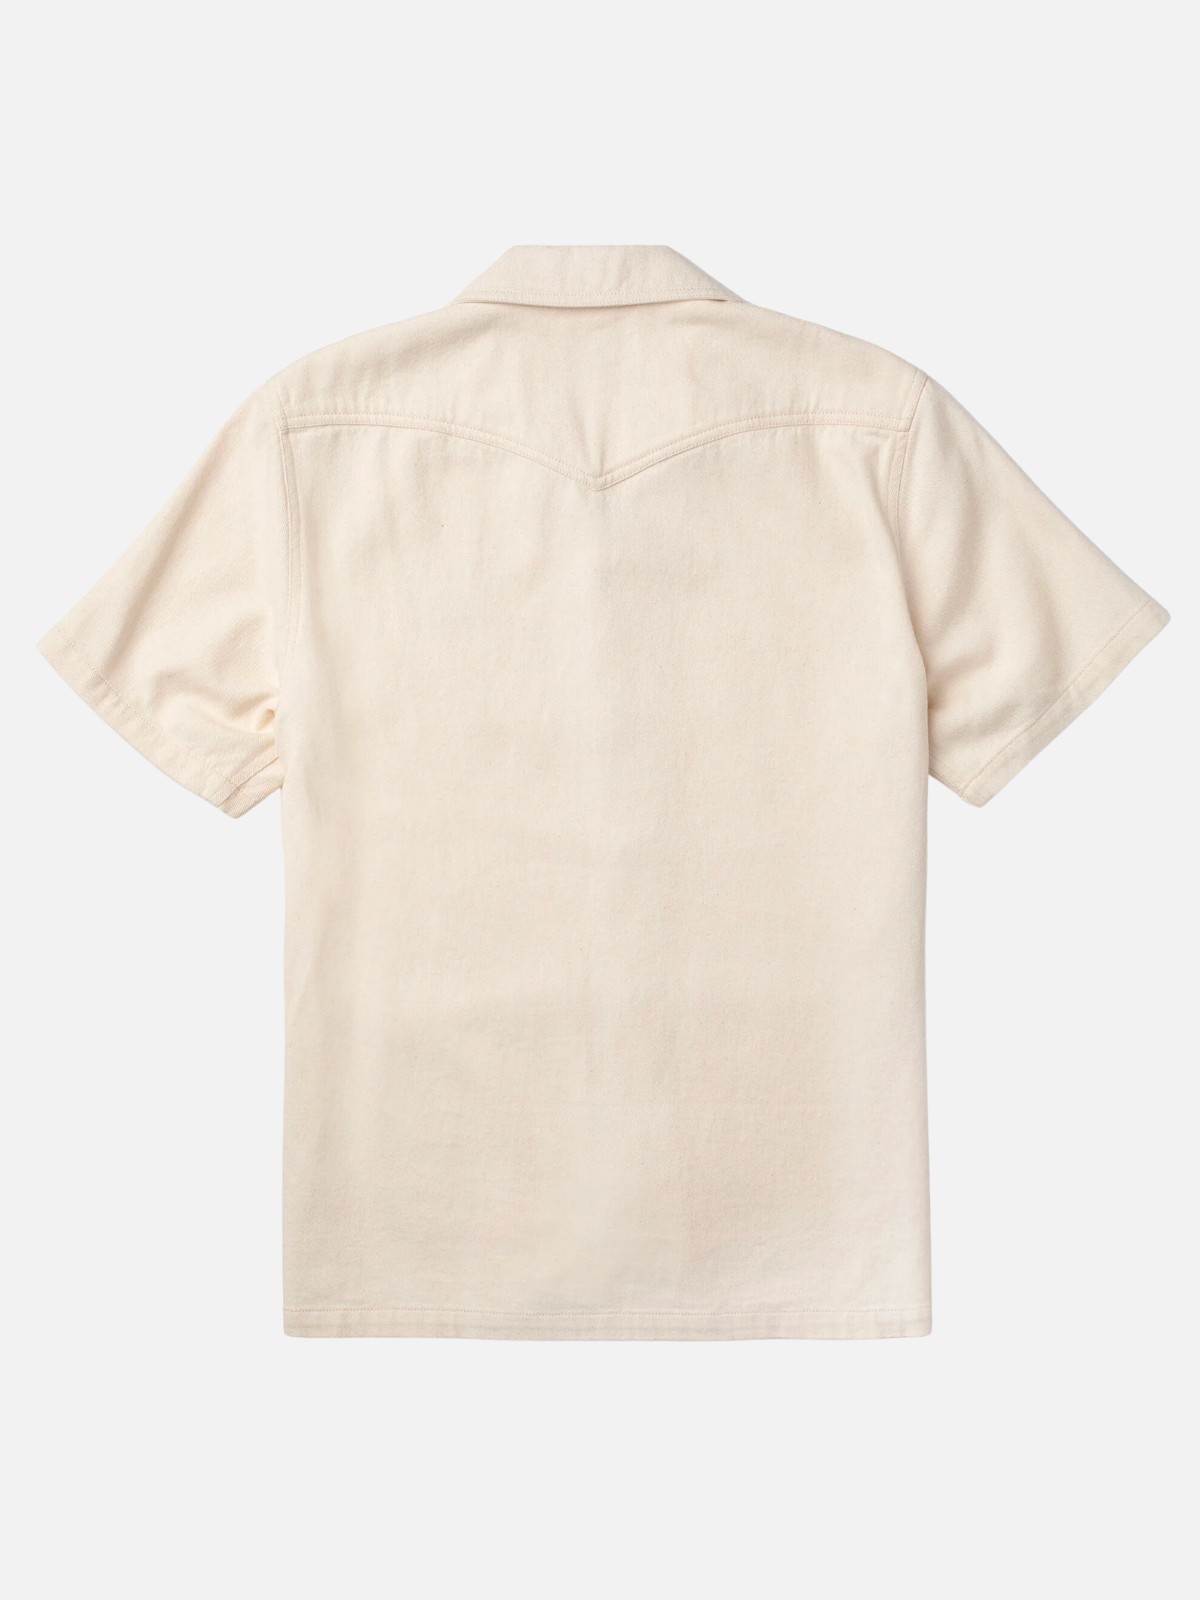 seager south paw whippersnapper cotton denim twill natural cream western pearl snap button down short sleeve kempt athens ga georgia men's clothing store